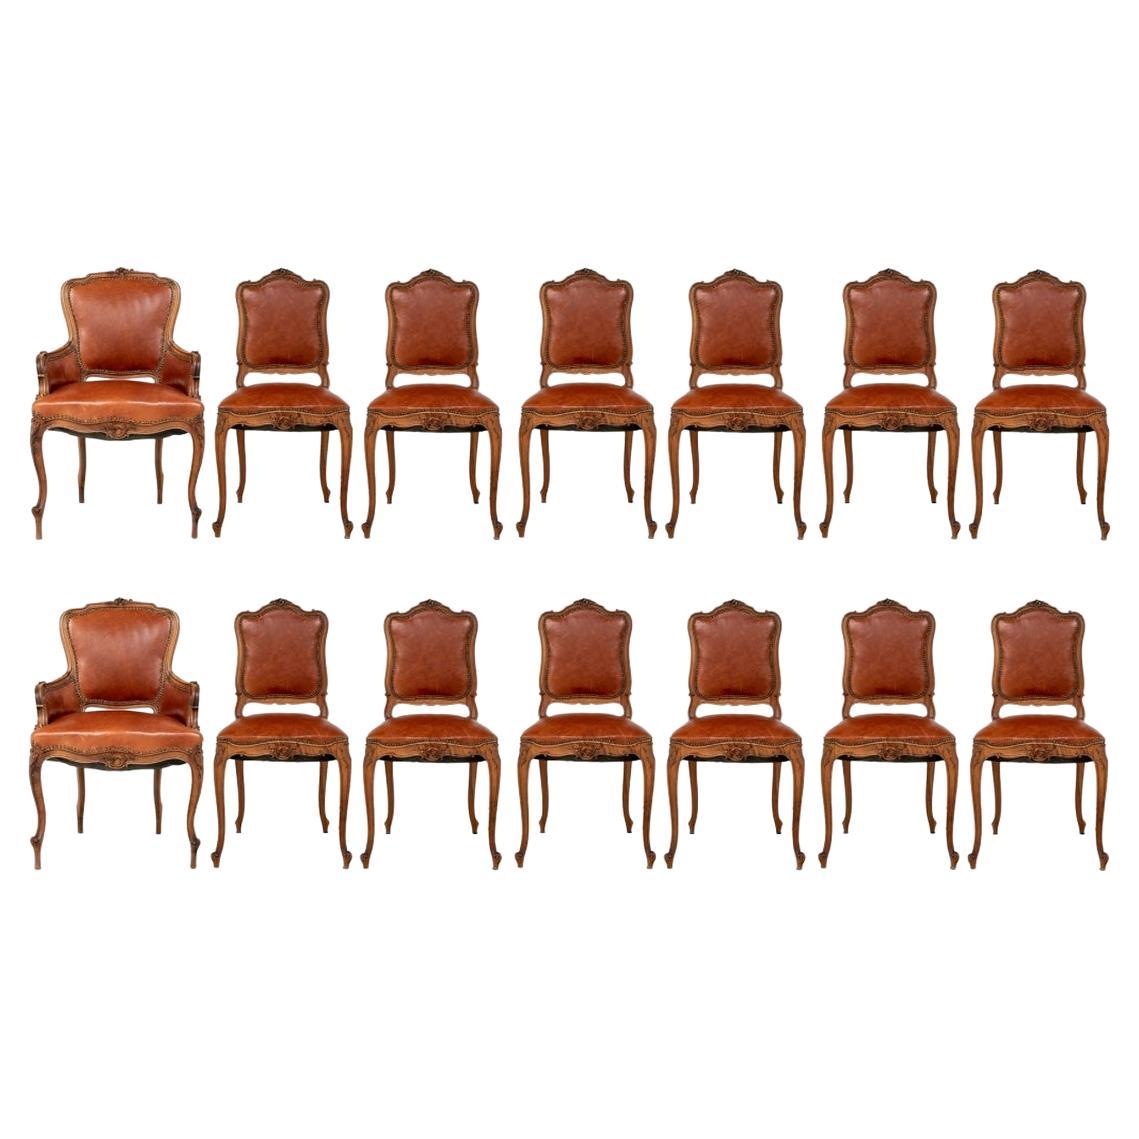 Late 19th-Early 20th C. Set of 14 French Leather Upholstered Dining Chairs